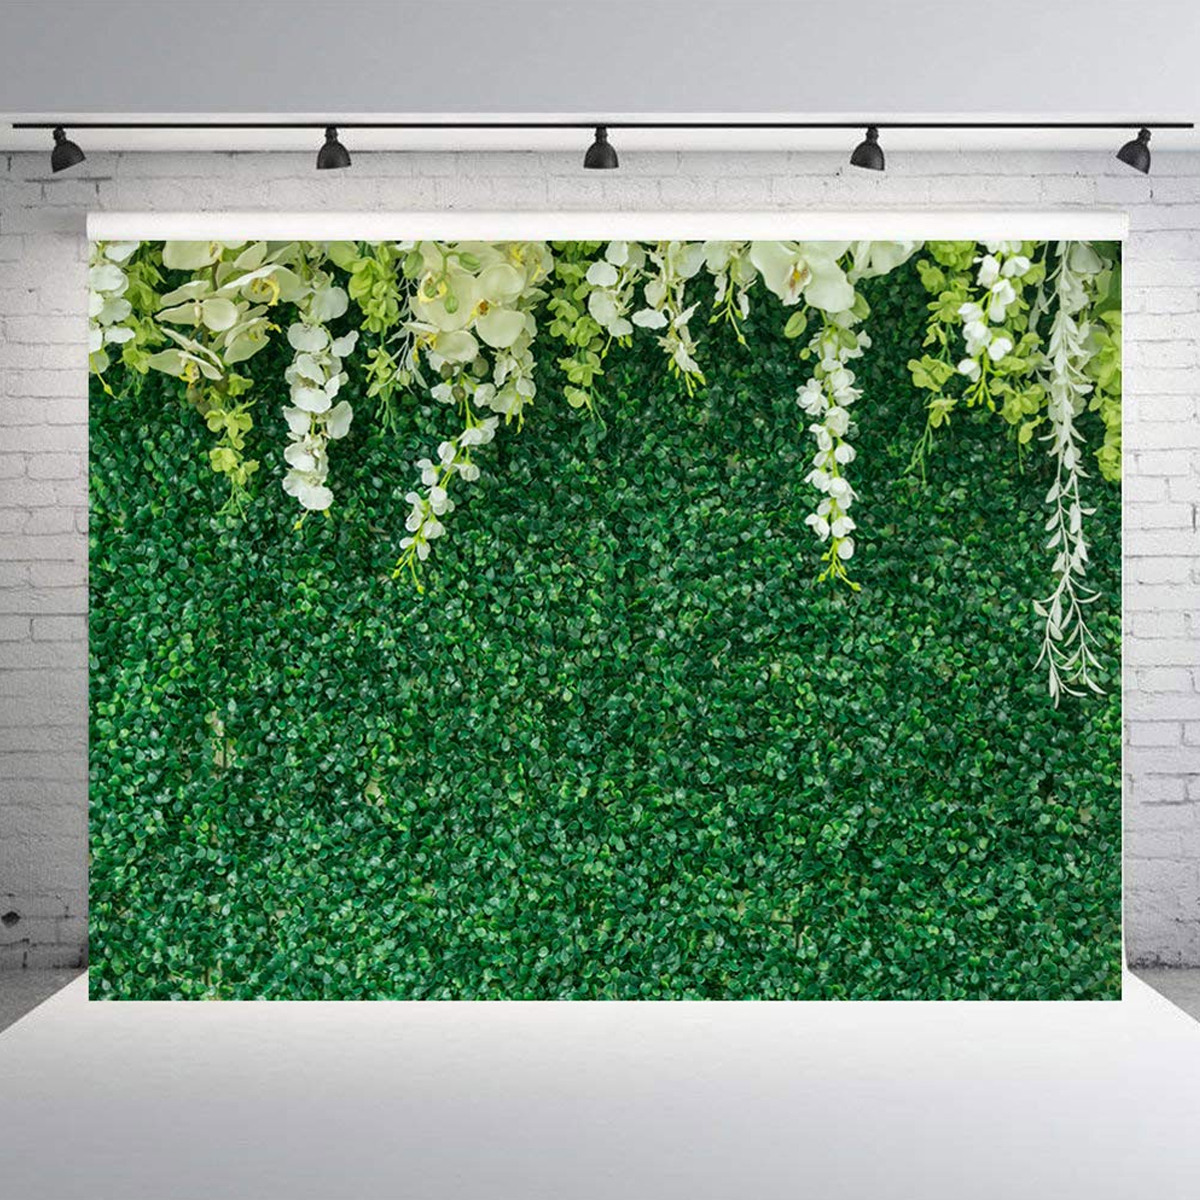 7ftx5ft-White-Flower-Green-Leaves-Photography-Background-Cloth-Backdrops-21x15m-1747745-7